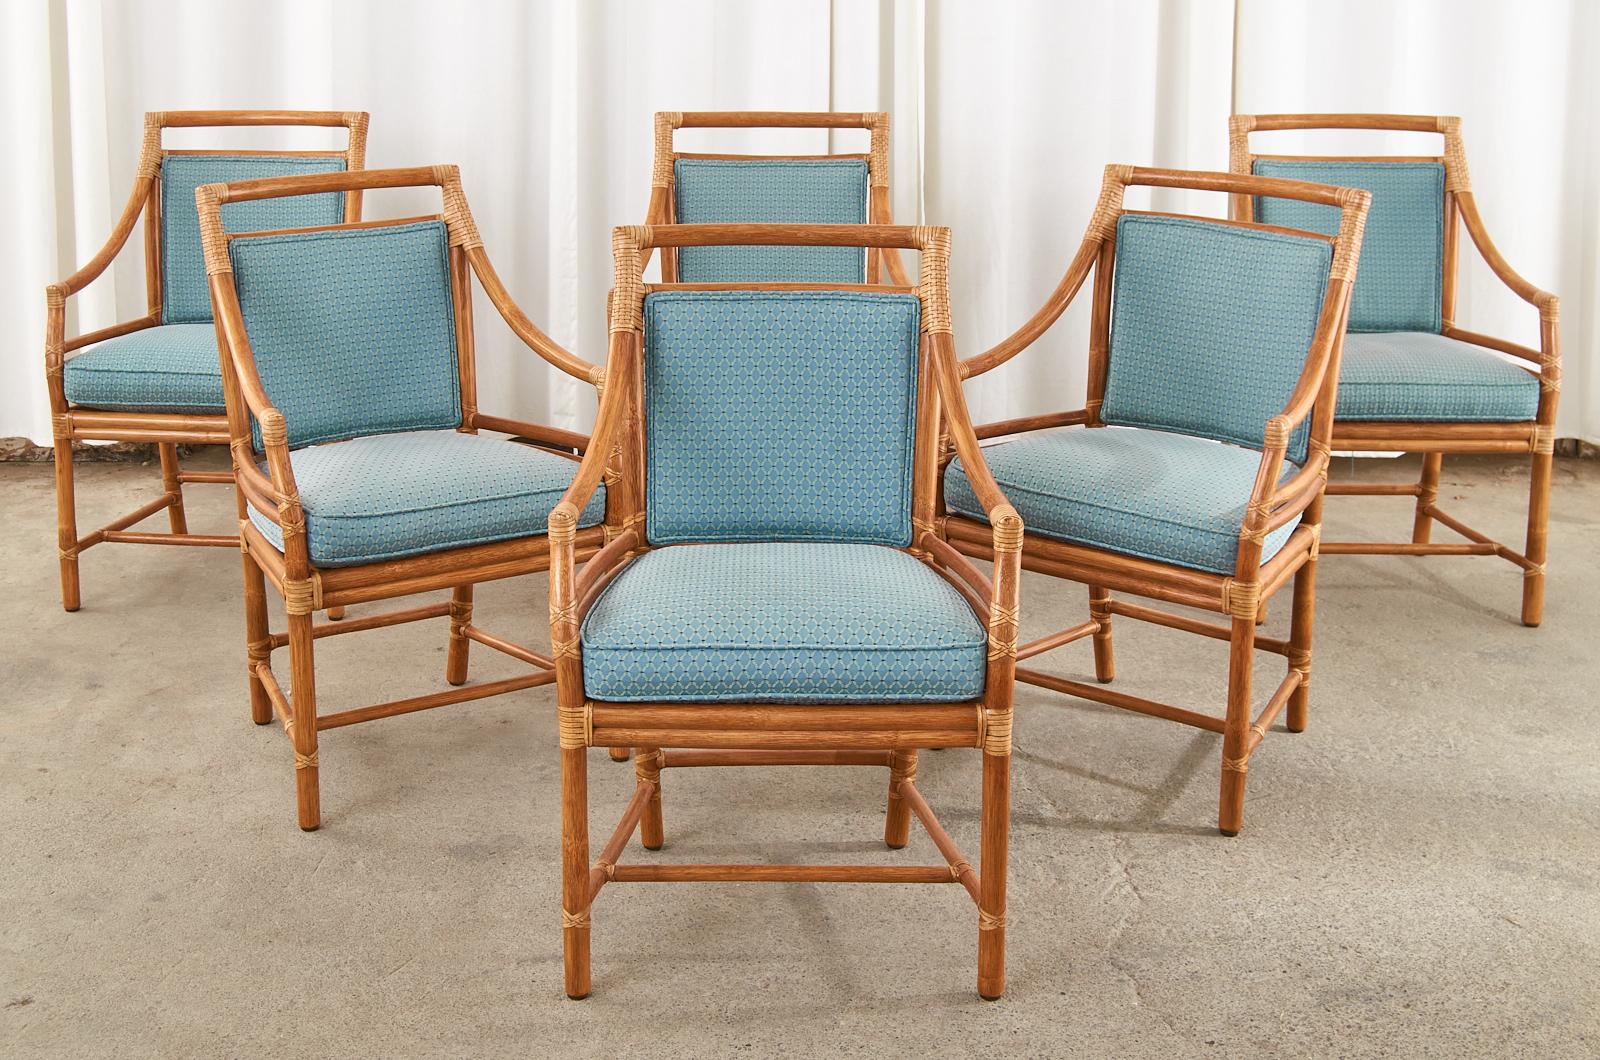 Extraordinary set of six rattan dining armchairs made in the California organic modern style by McGuire. Model number #MCM59B chairs were designed by John McGuire feature a rattan frame with a square back having his signature bullseye target design.